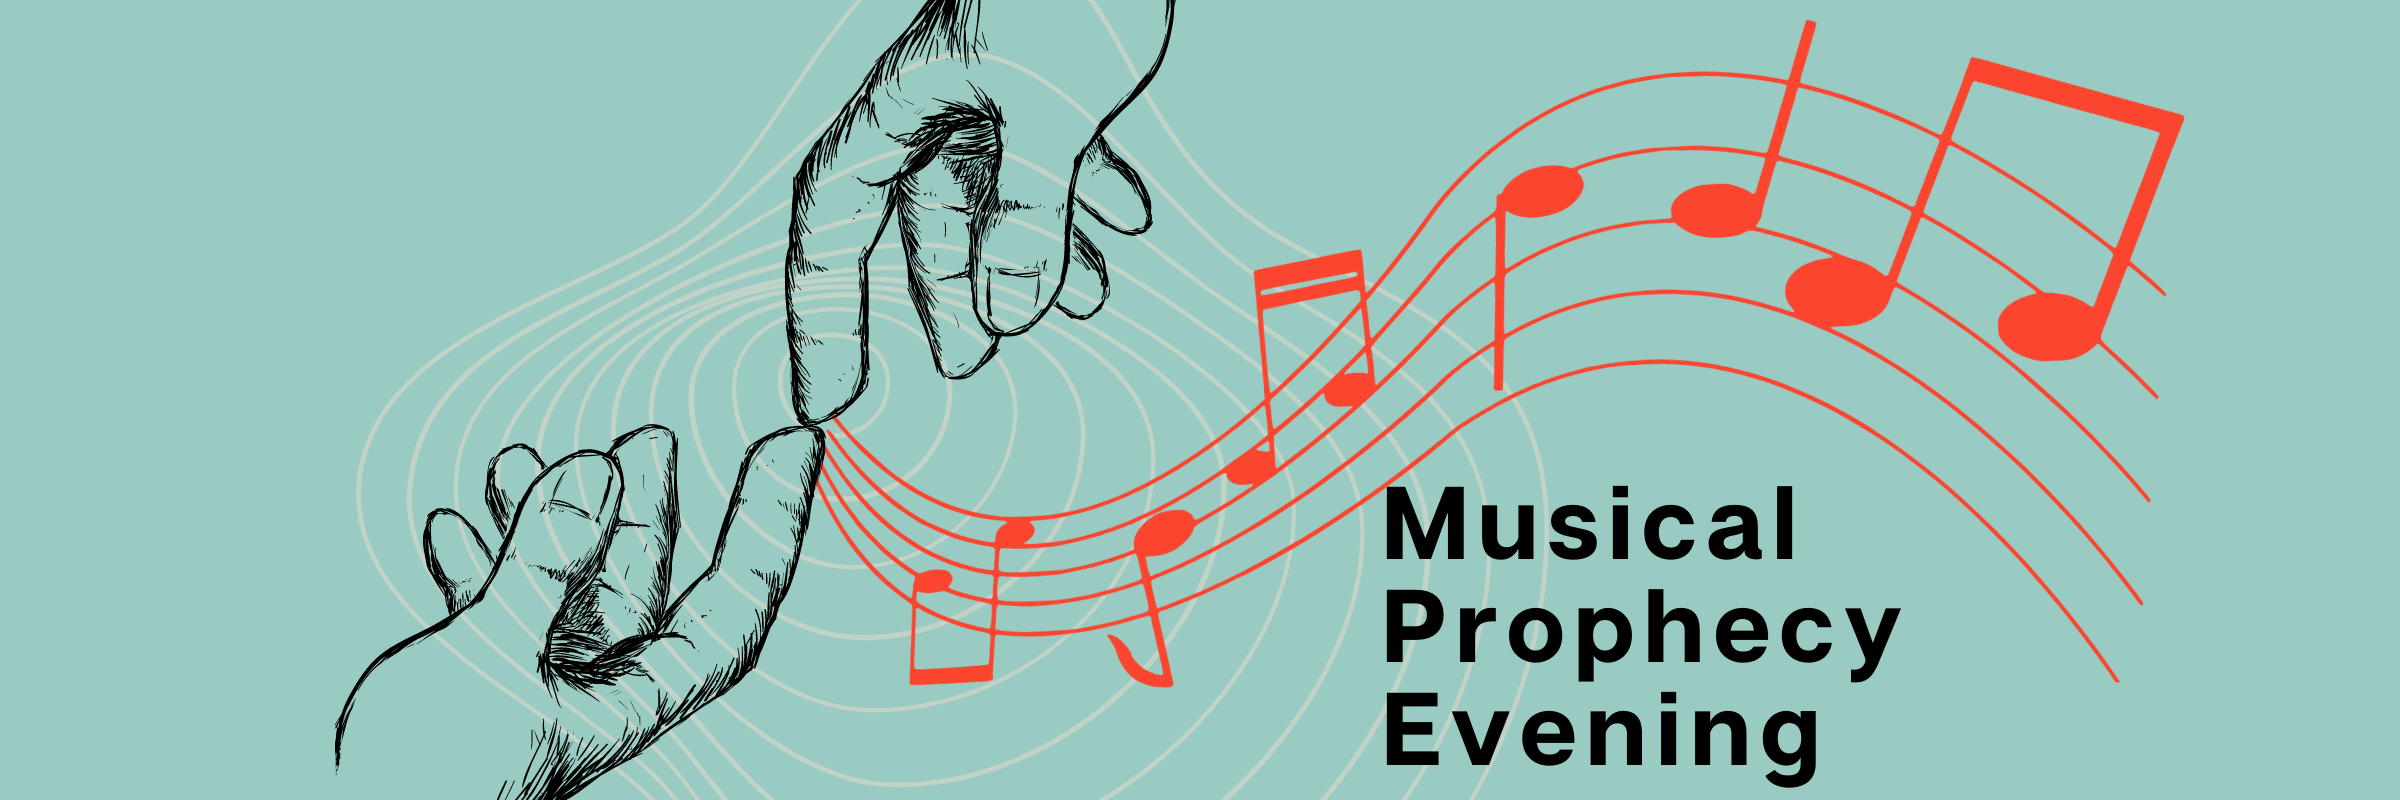 Musical Prophecy Evenings all 